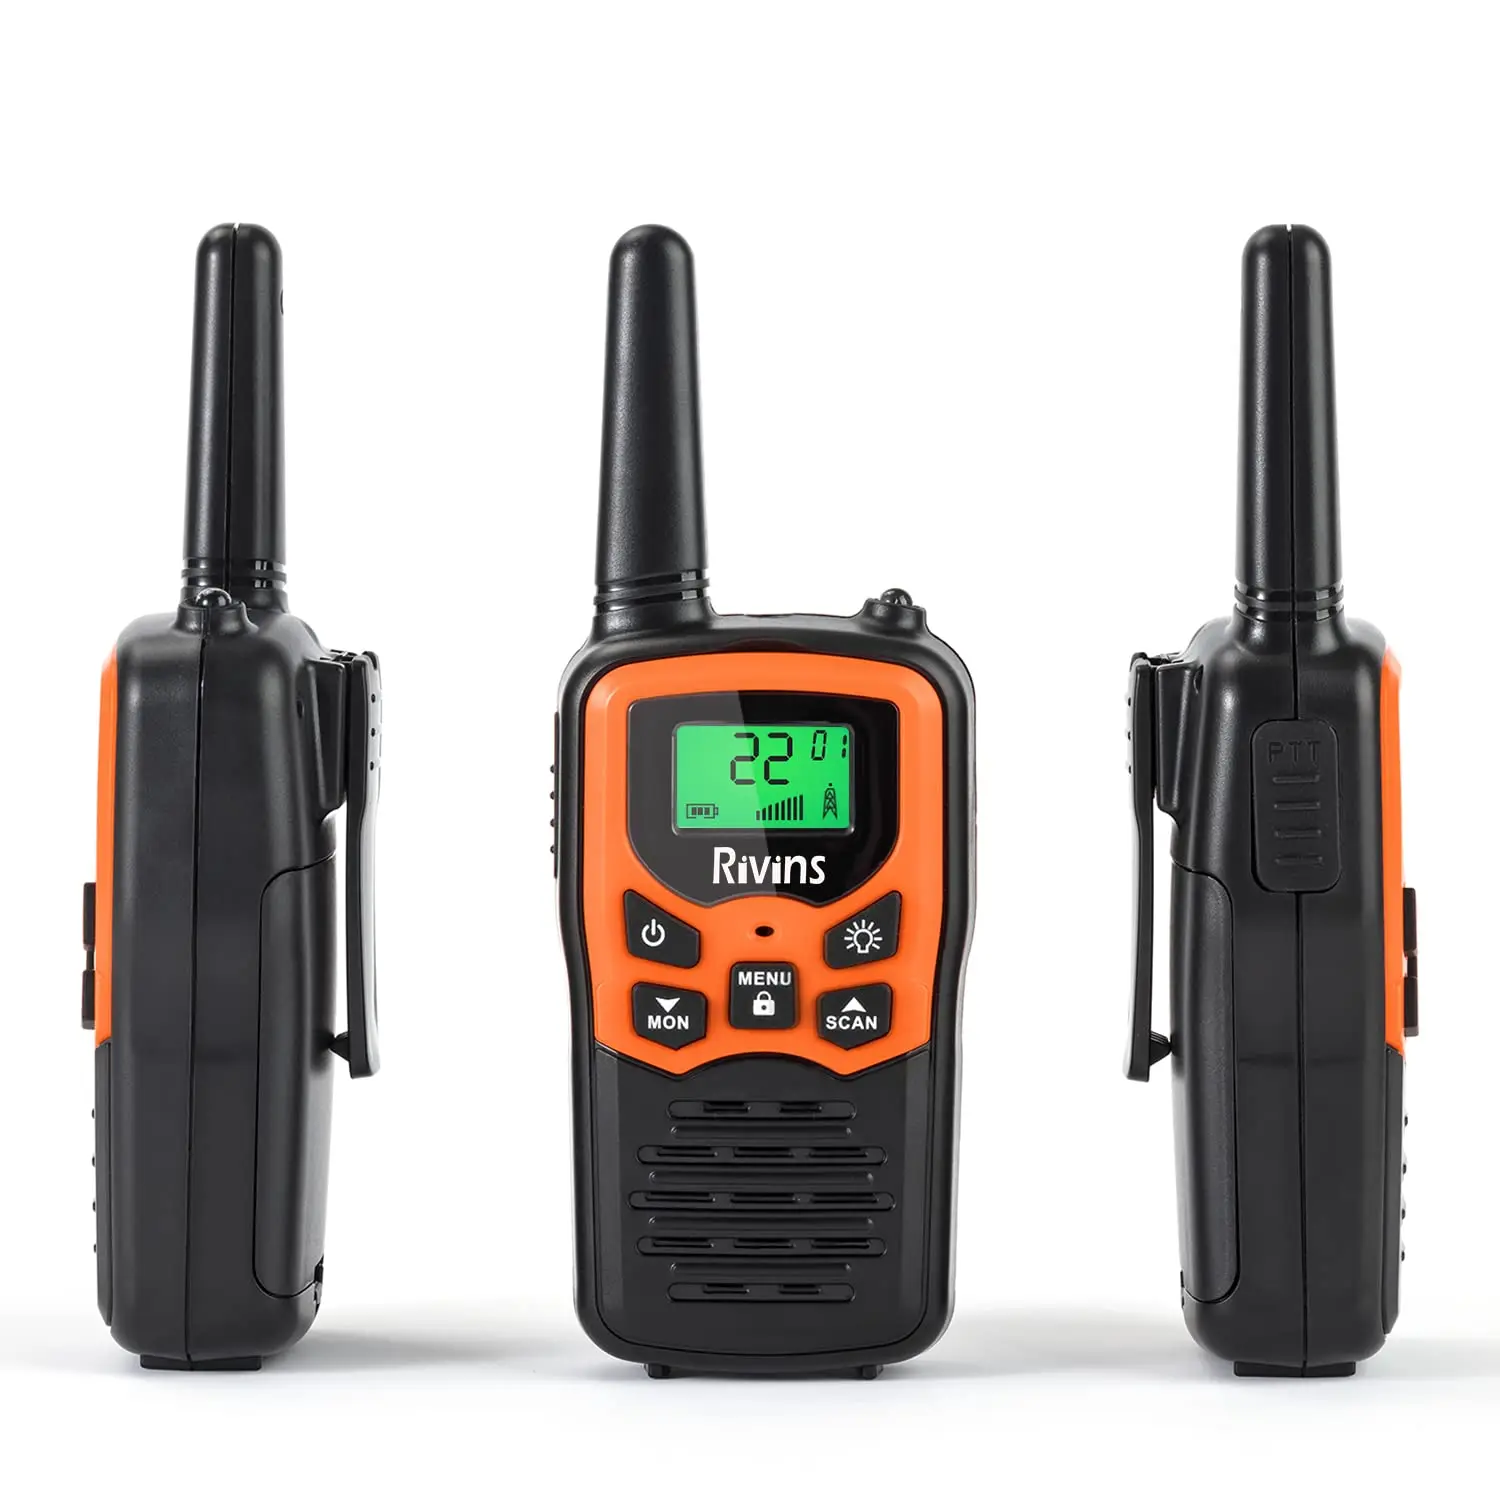  Walkie Talkies, MOICO Long Range Walkie Talkies for Adults with  22 FRS Channels, Family Walkie Talkie with LED Flashlight VOX LCD Display  for Hiking Camping Trip (Orange 6 Pack) : Electronics